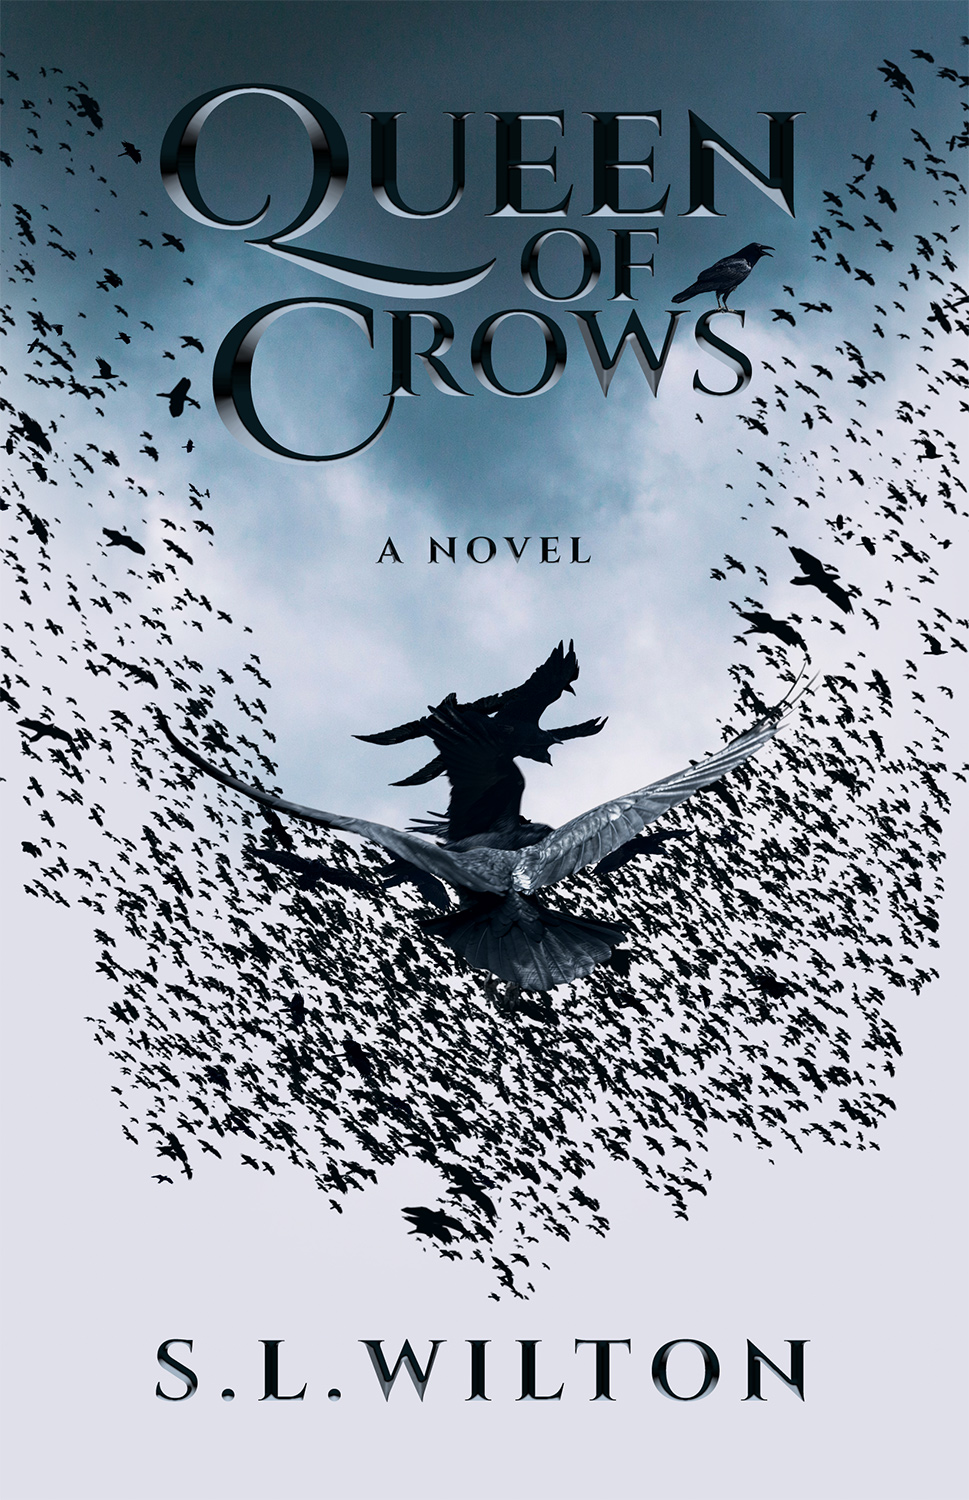 The cover of the novel Queen of Crows